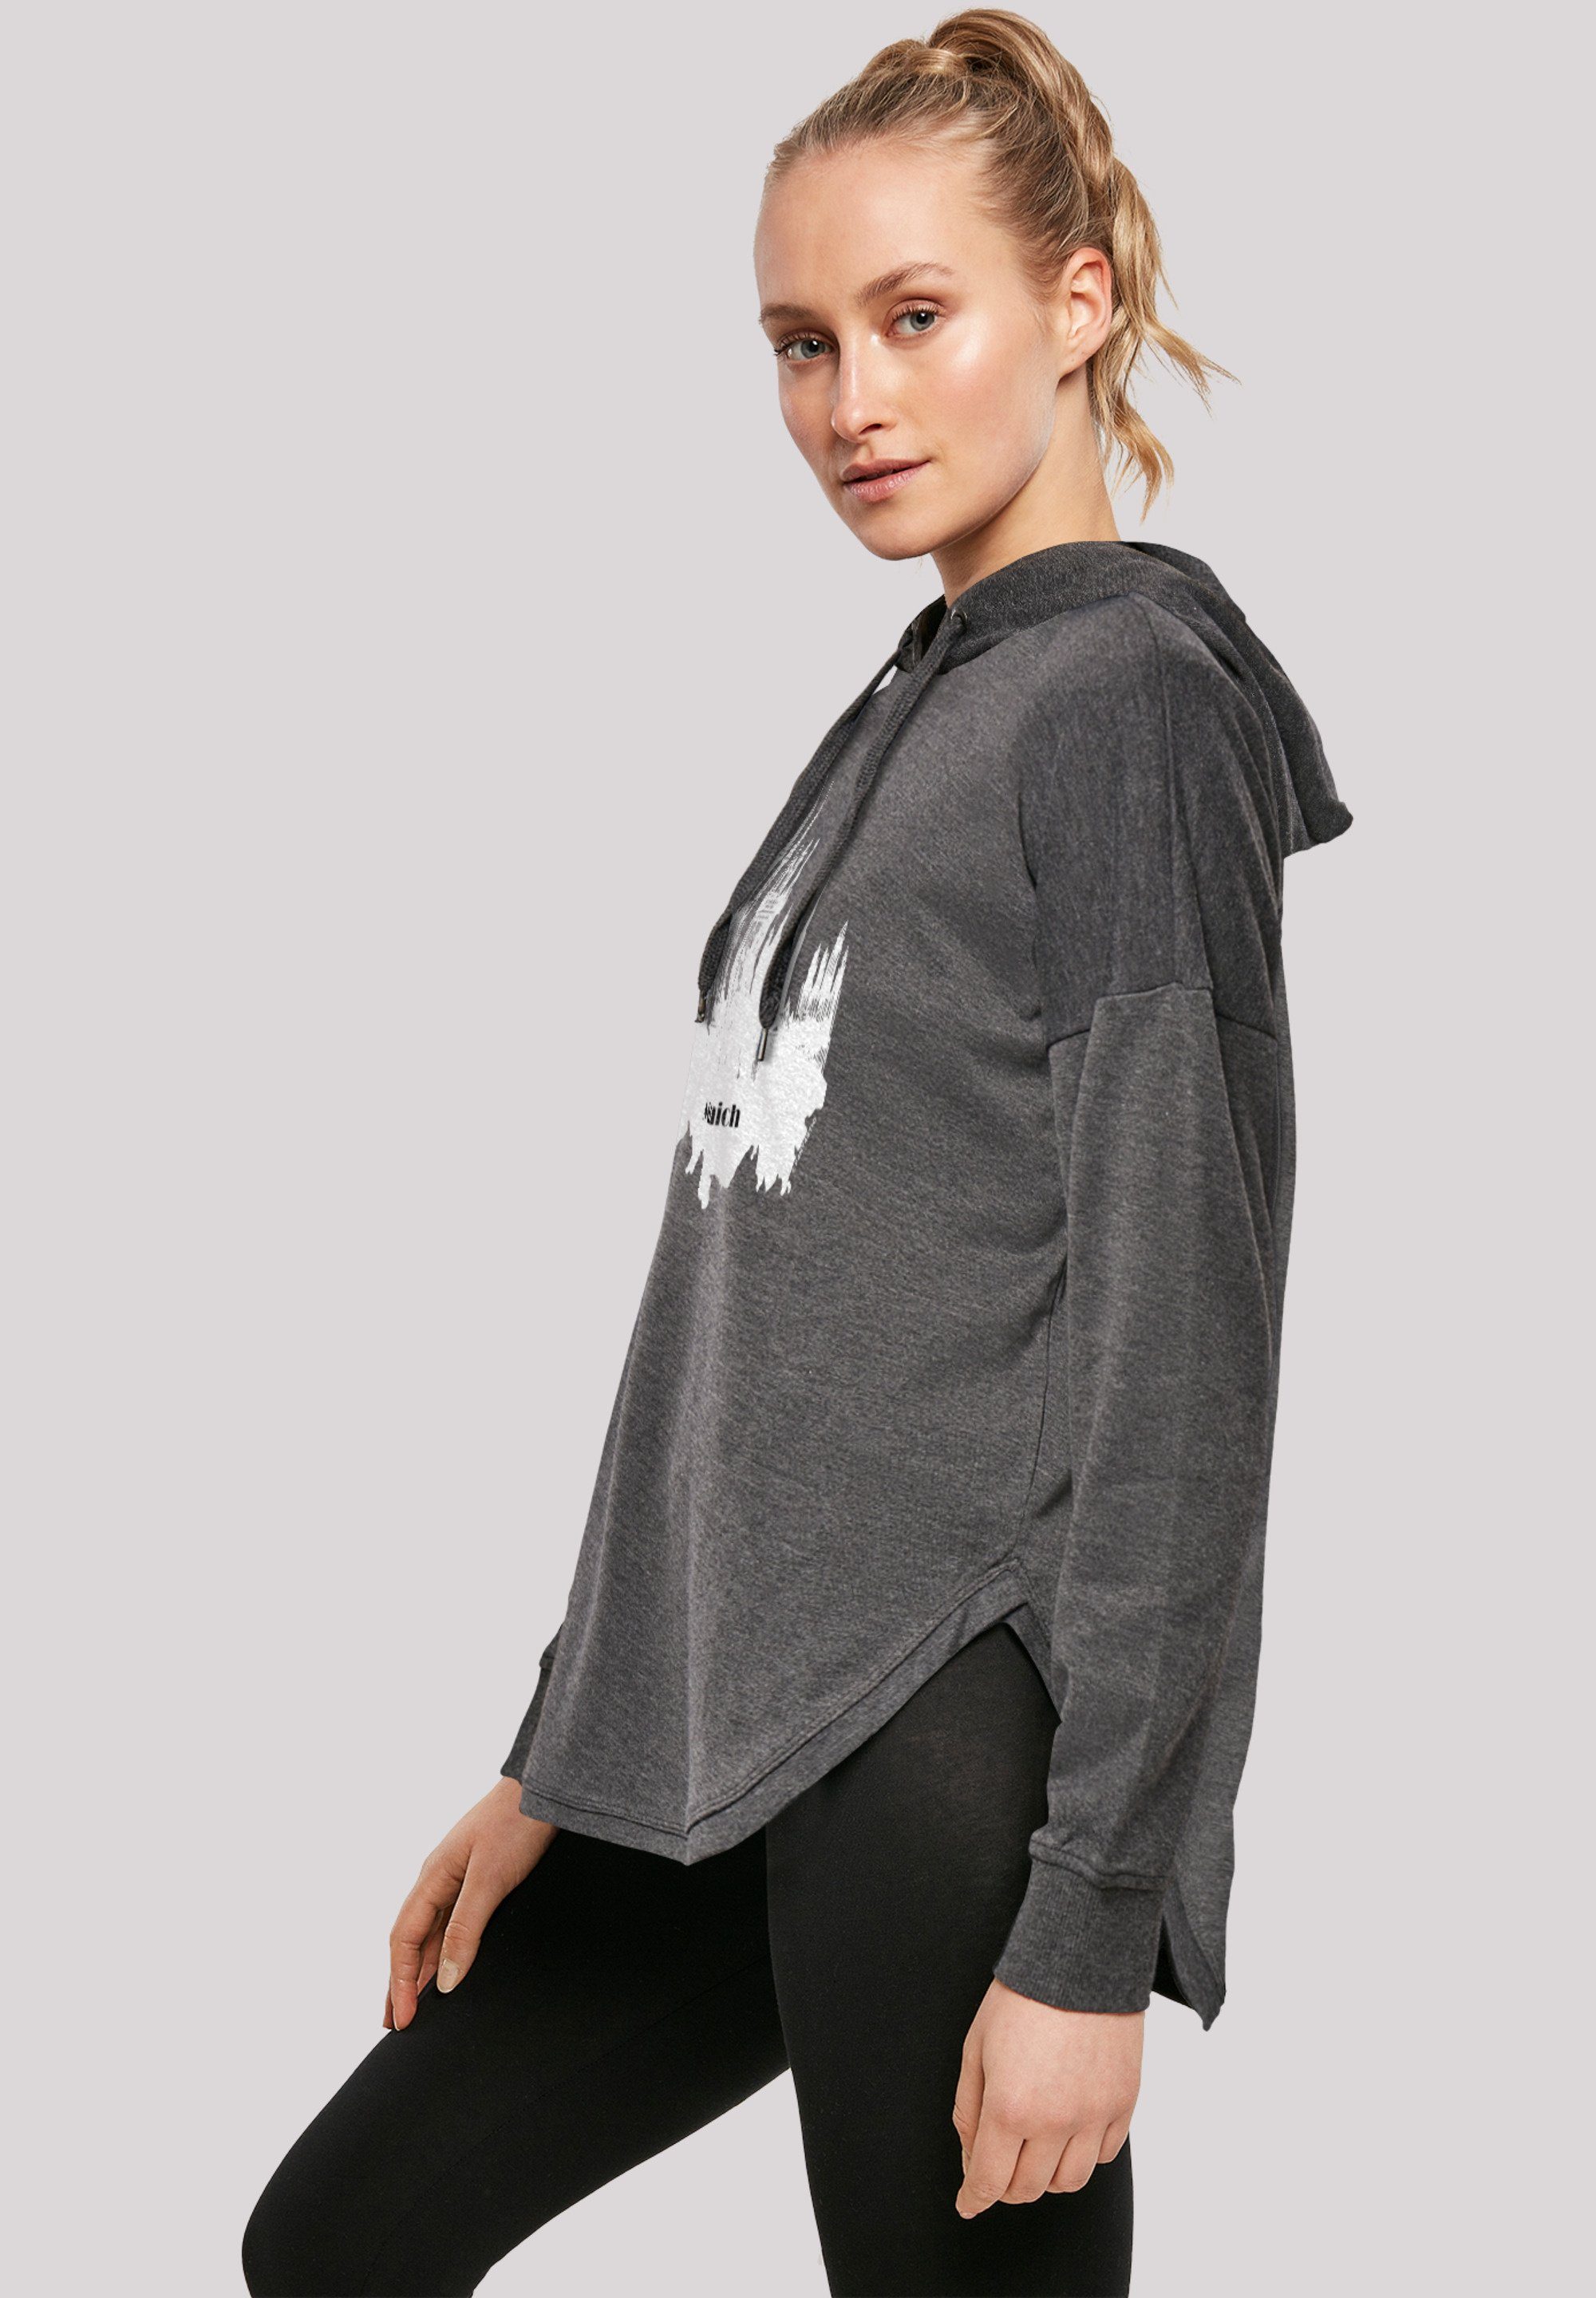 Cities Print - F4NT4STIC Munich skyline charcoal Kapuzenpullover Collection